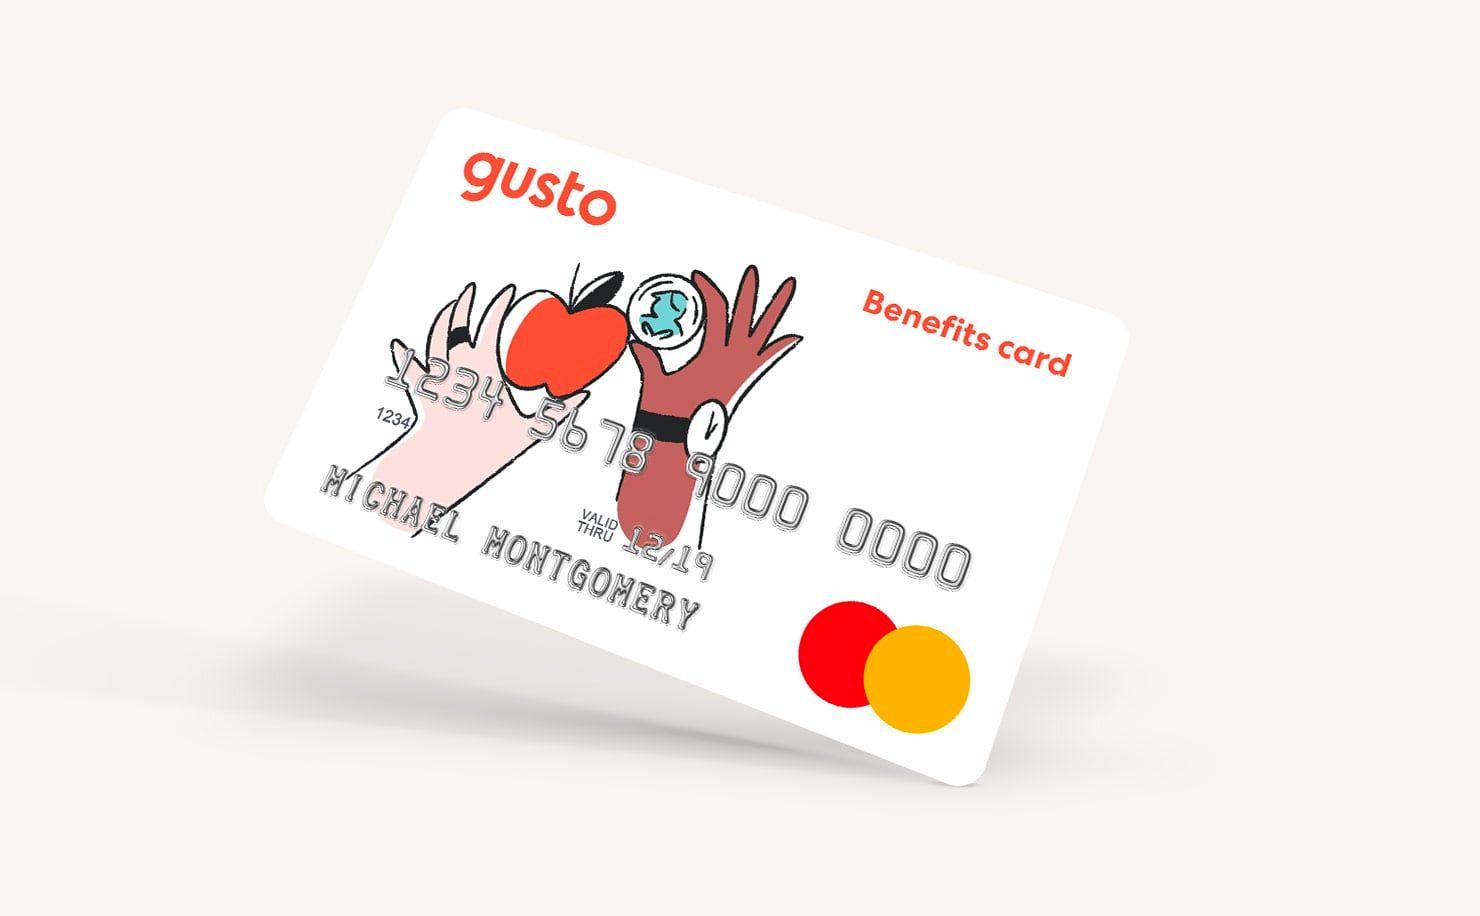 Gusto Logo - Brand New: New Logo And Identity For Gusto Done In House